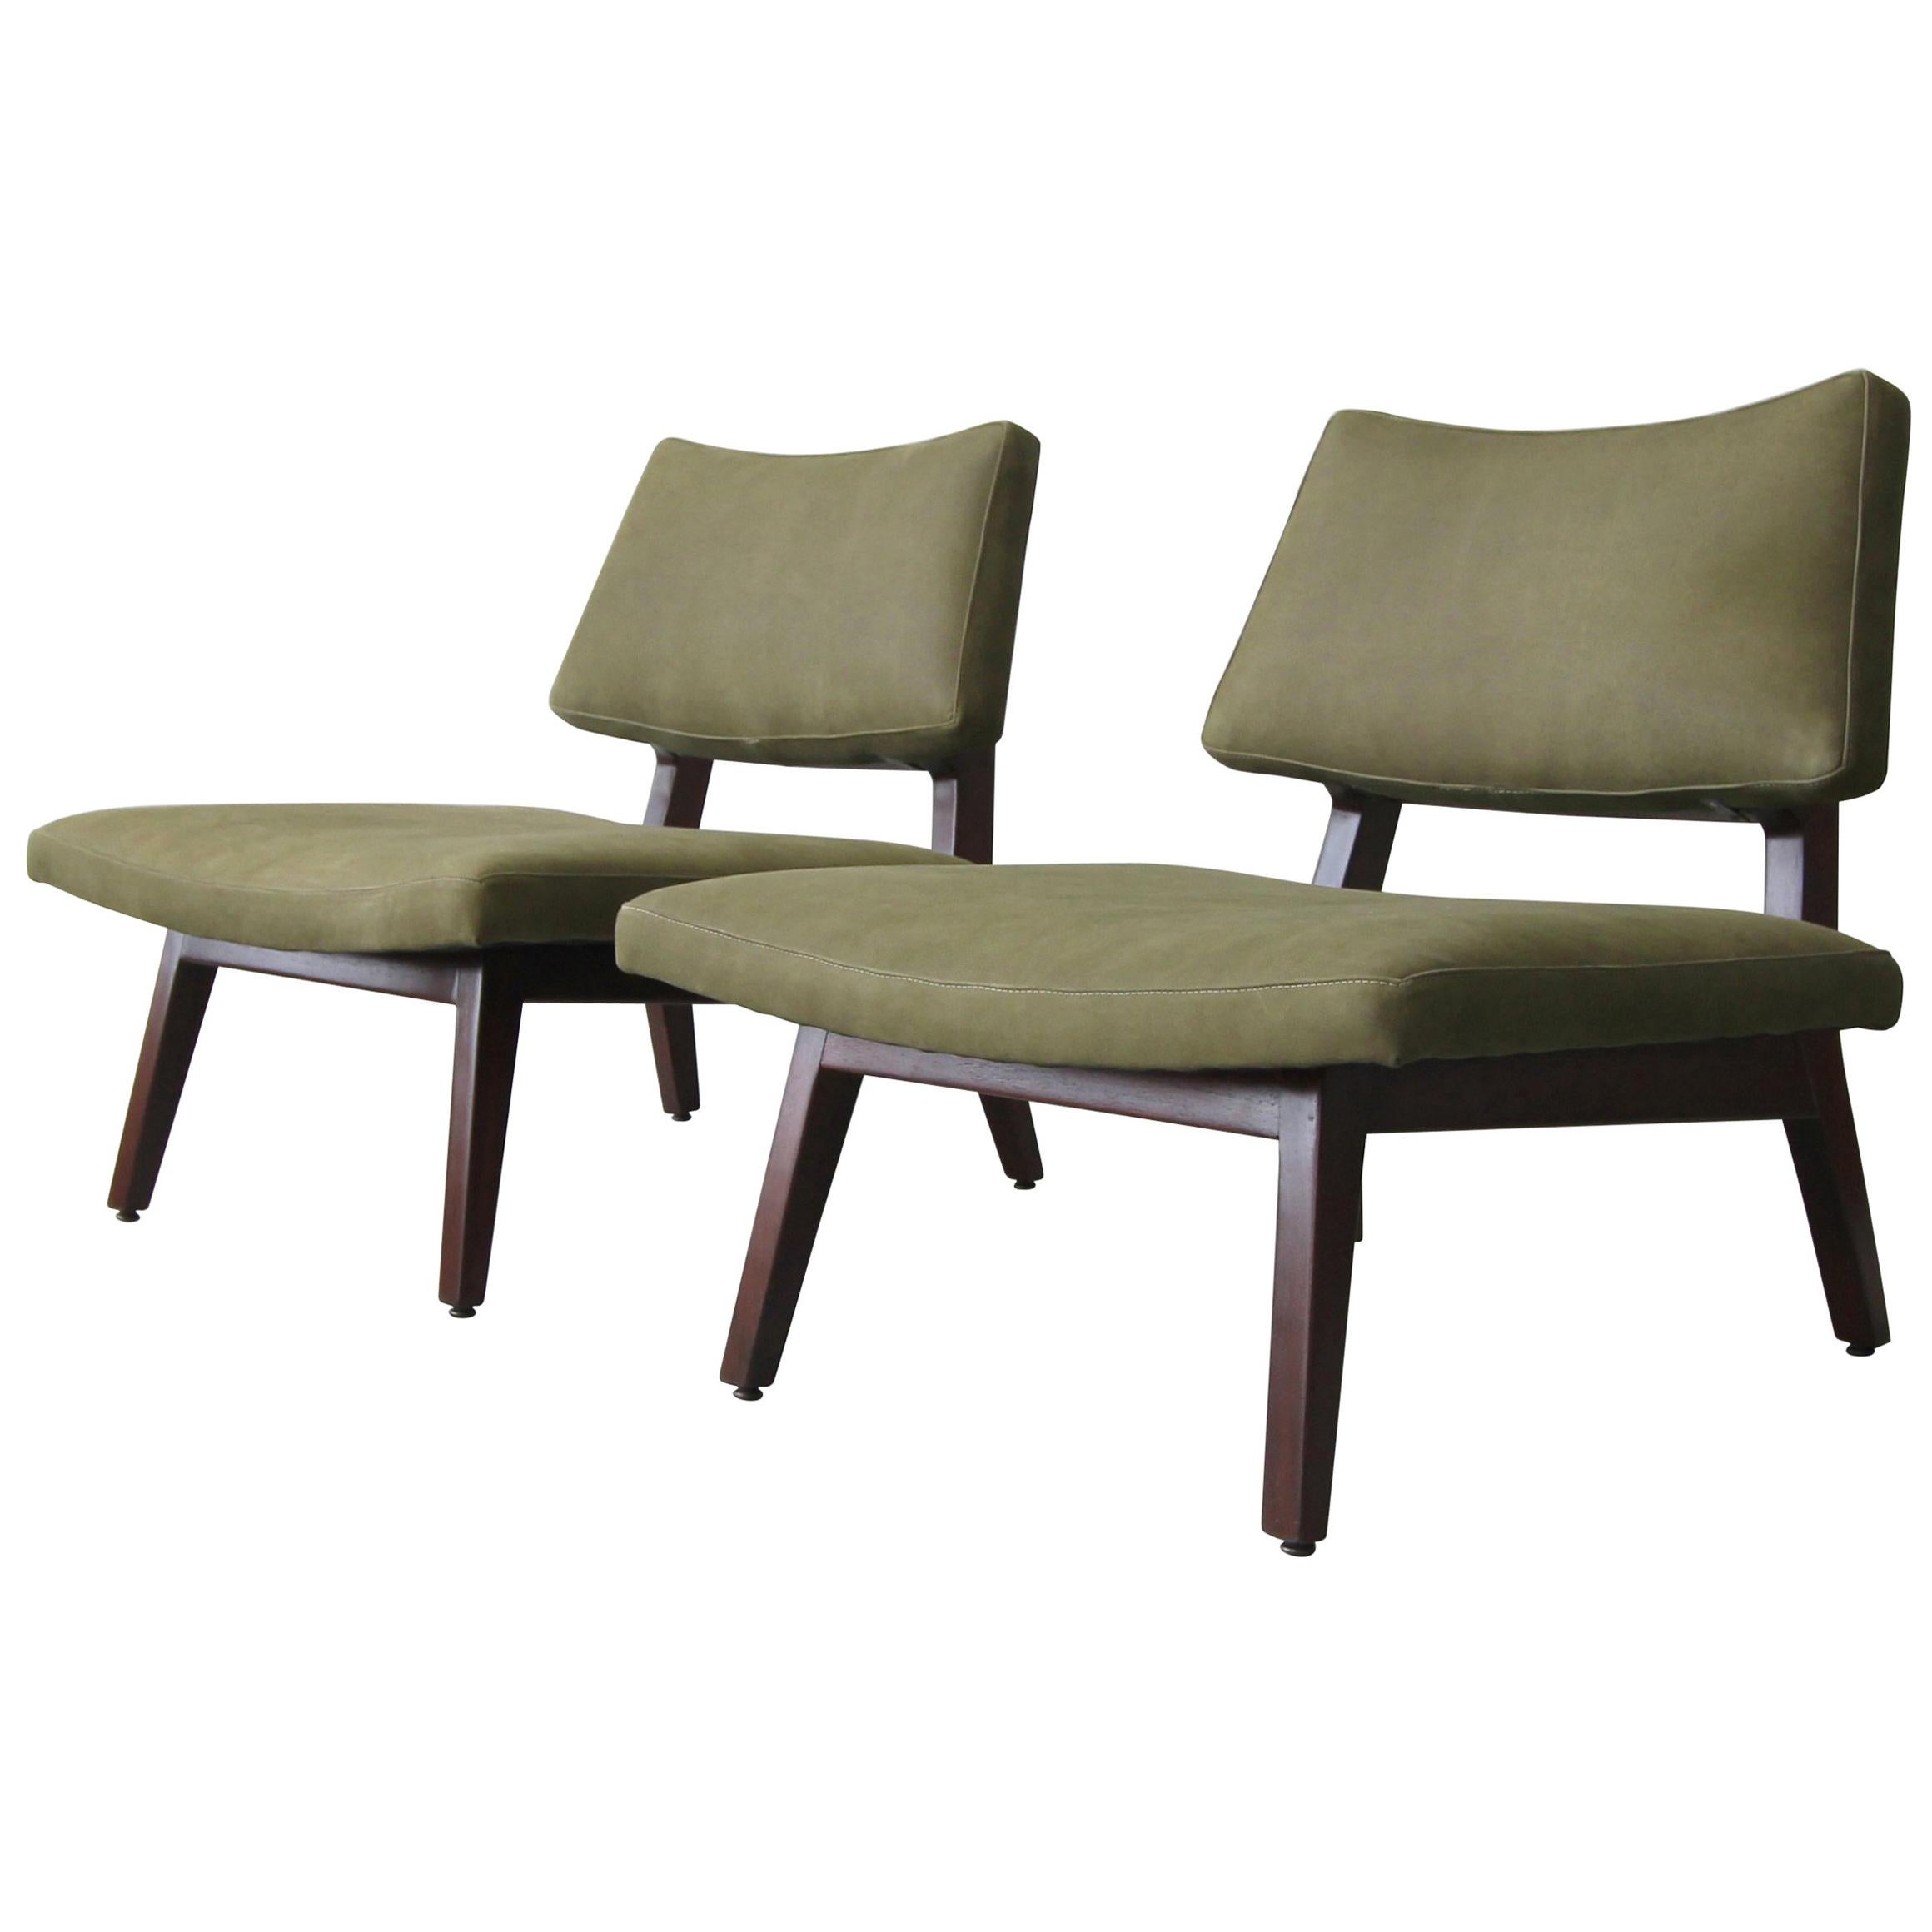 Pair of Midcentury Walnut and Leather Slipper Lounge Chairs by Jens Risom